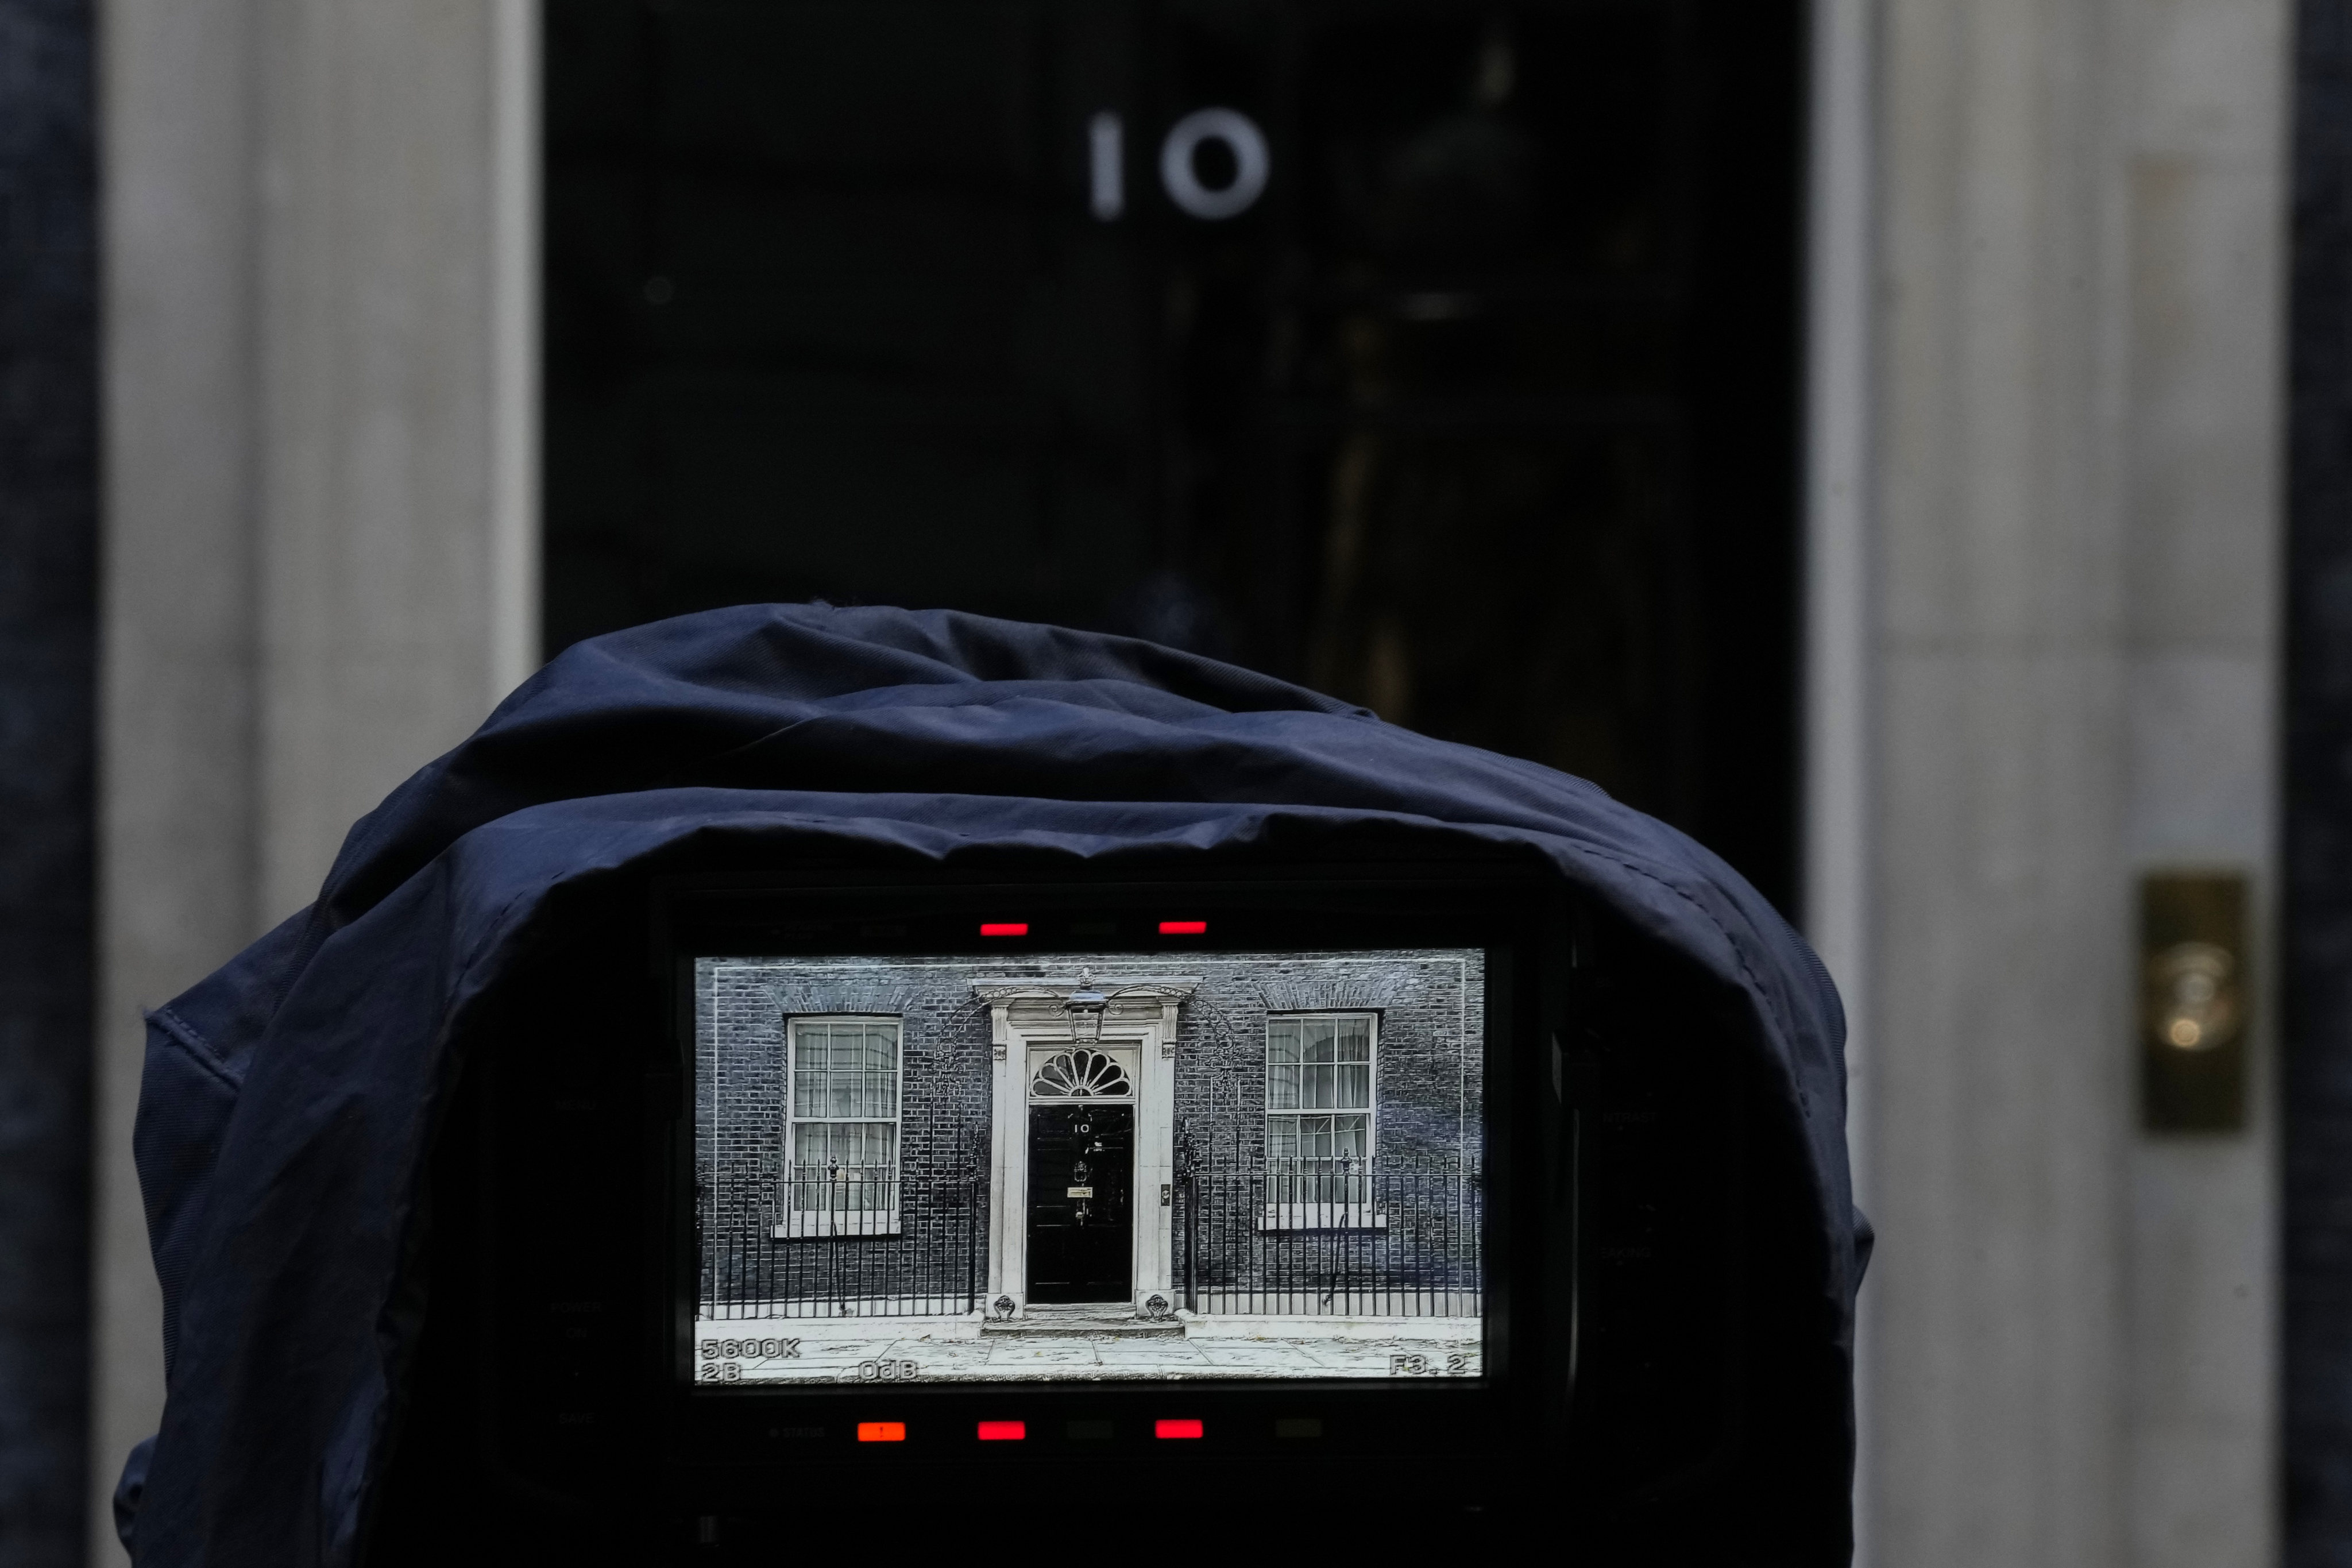 Number 10, Downing Street as seen through the lens of a television camera. Photo: AP